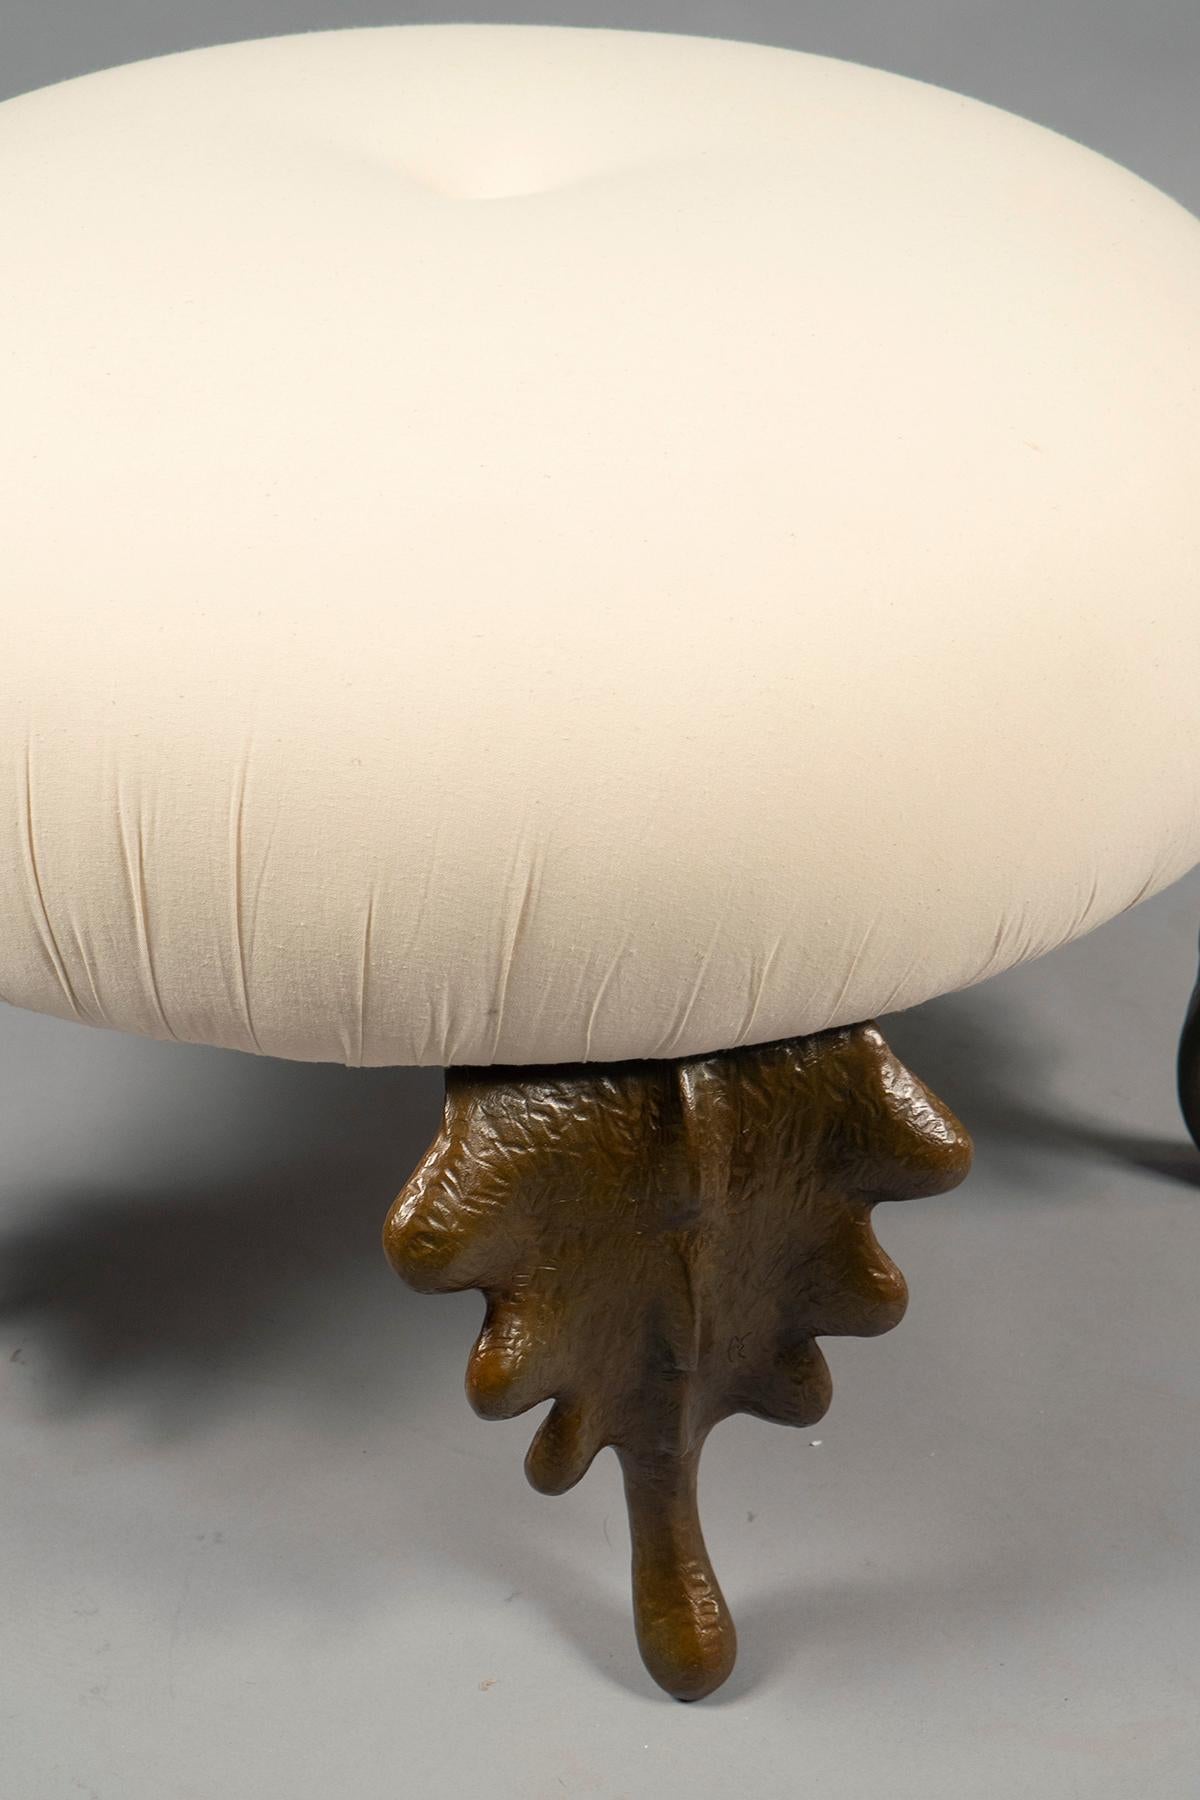 Round cushion featuring one tufted button, supported by five fantastical bronze leaf legs. Custom sizes and finishes available.